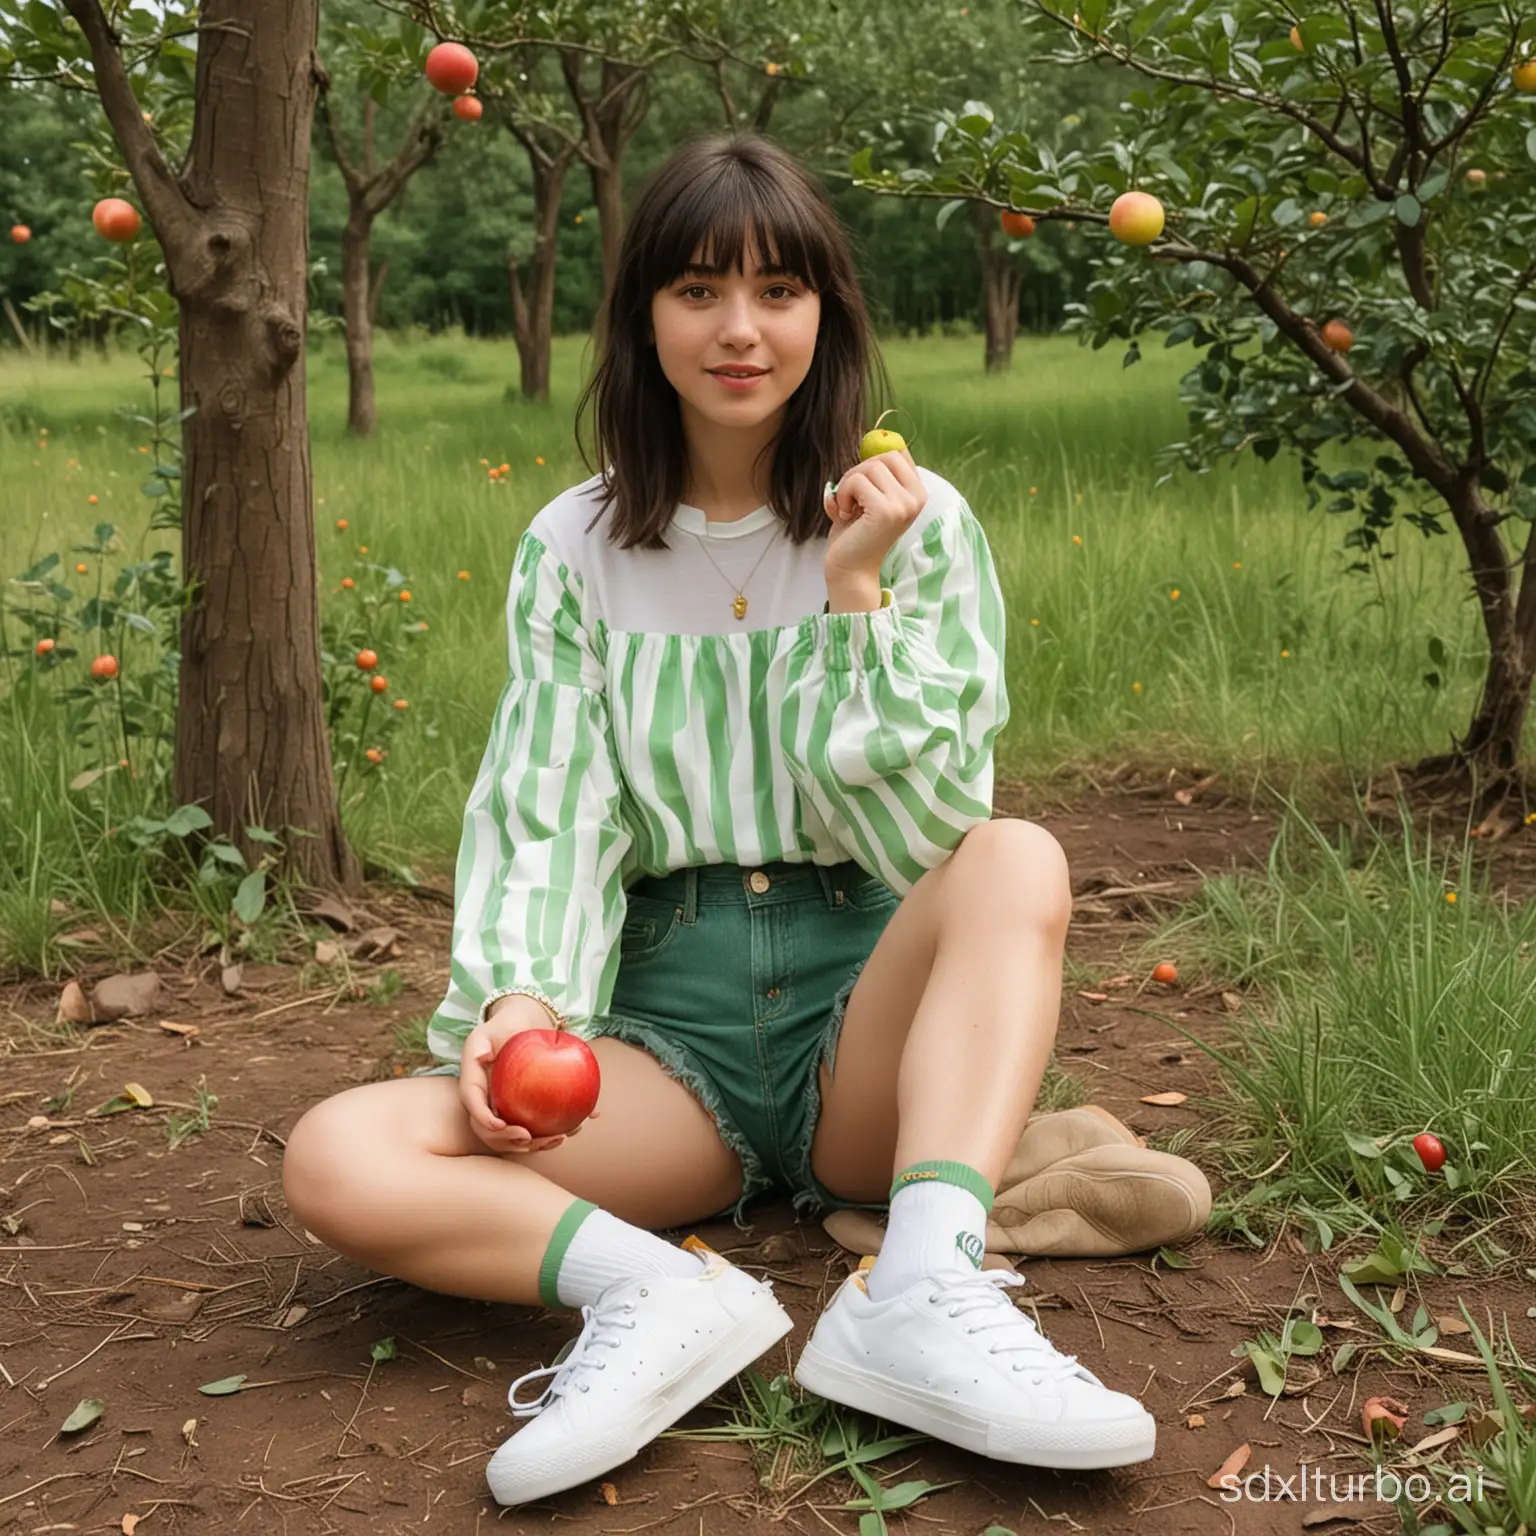 Whimsical-Girl-Offering-Red-Apple-in-Natural-Forest-Setting